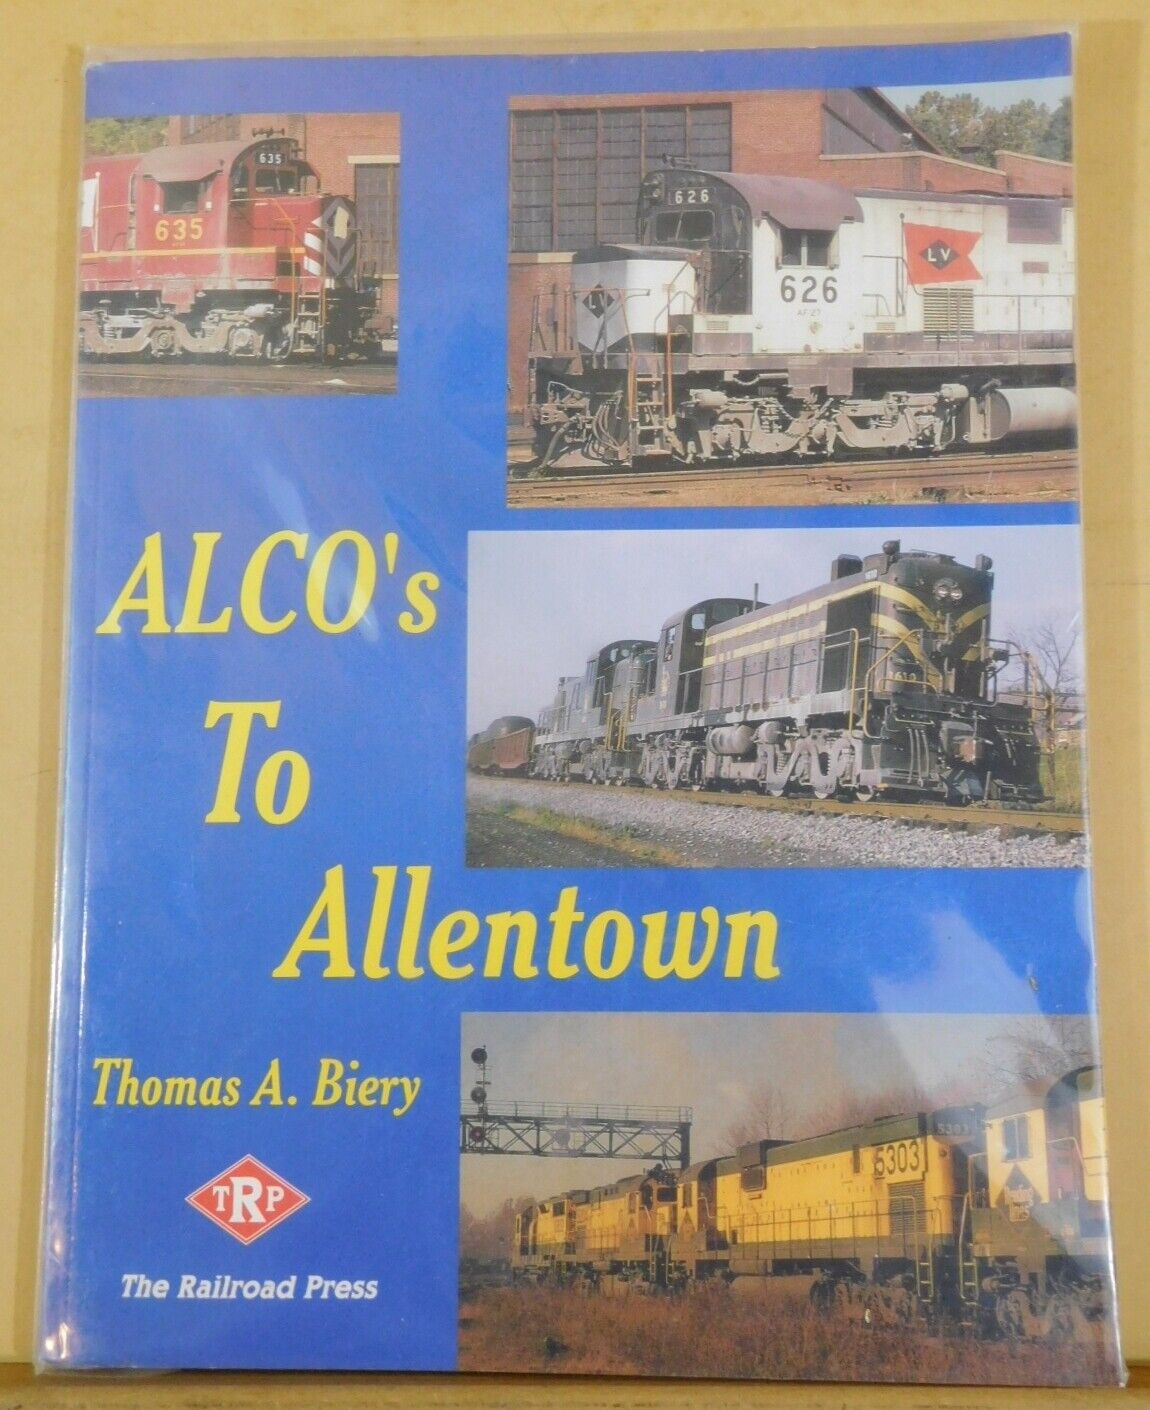 Alco’s to Allentown by Thomas A. Biery TRP the Railroad Press Soft Cover